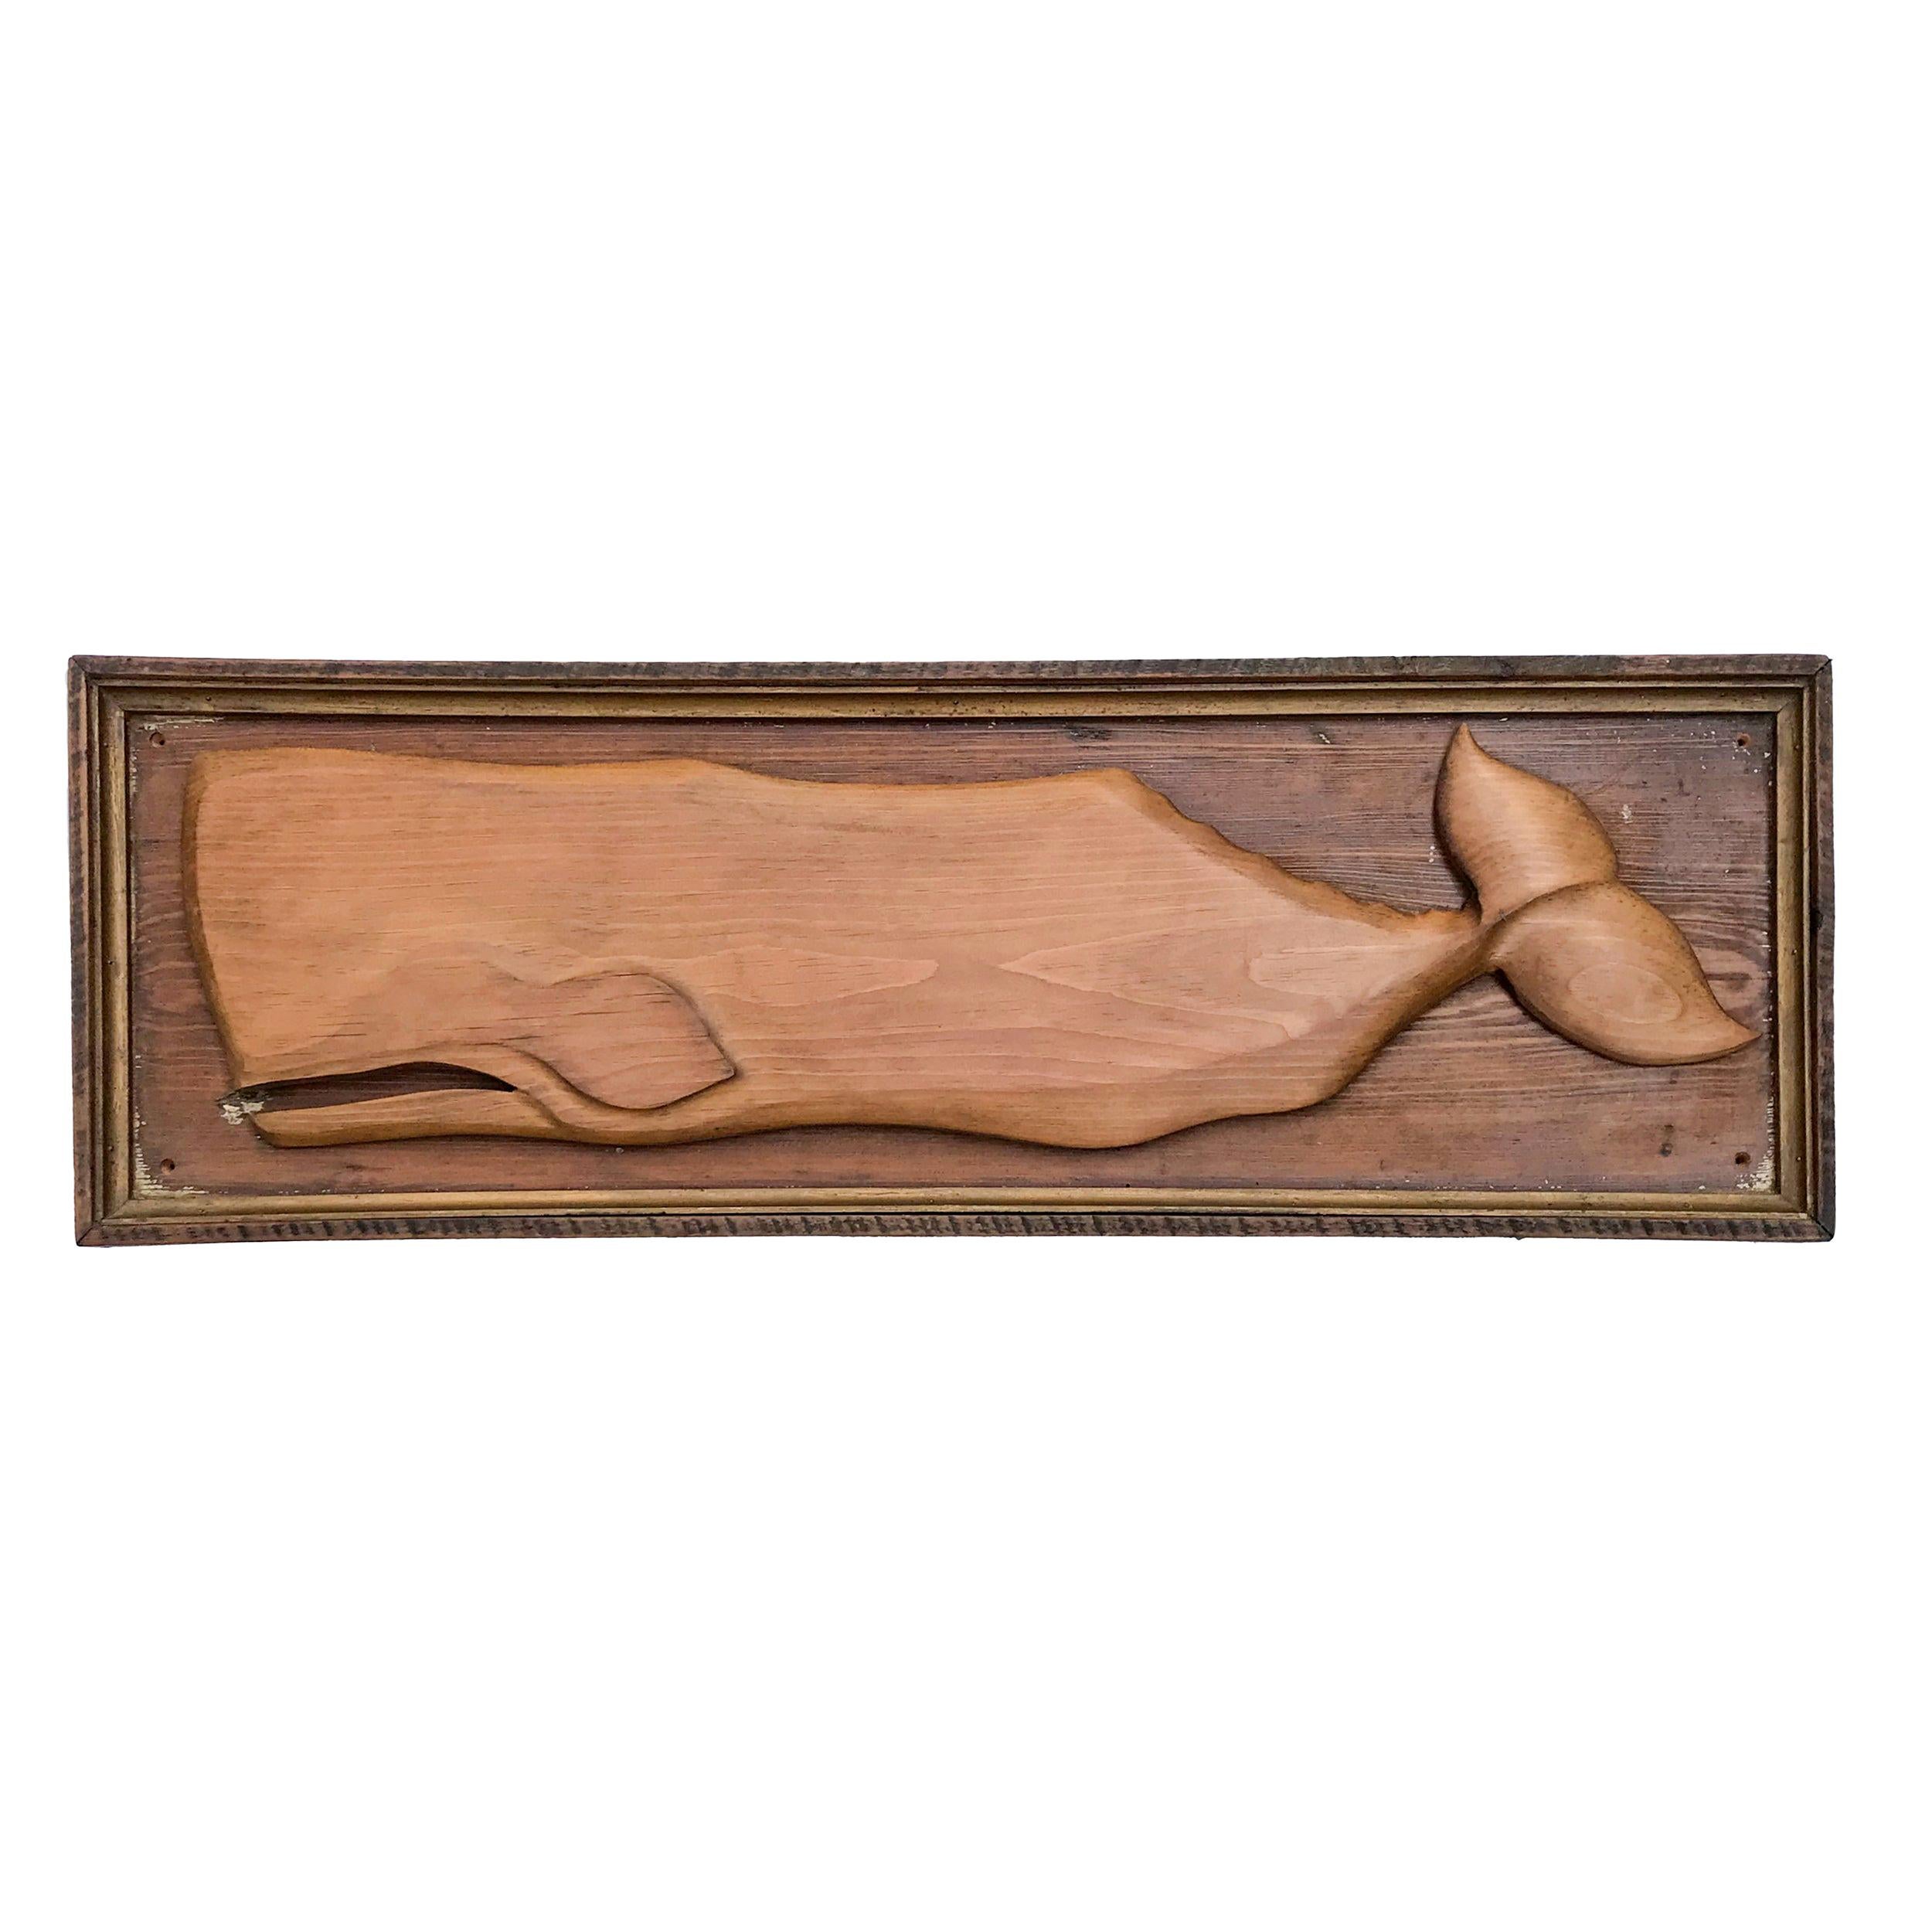 Carved Whale on Plaque